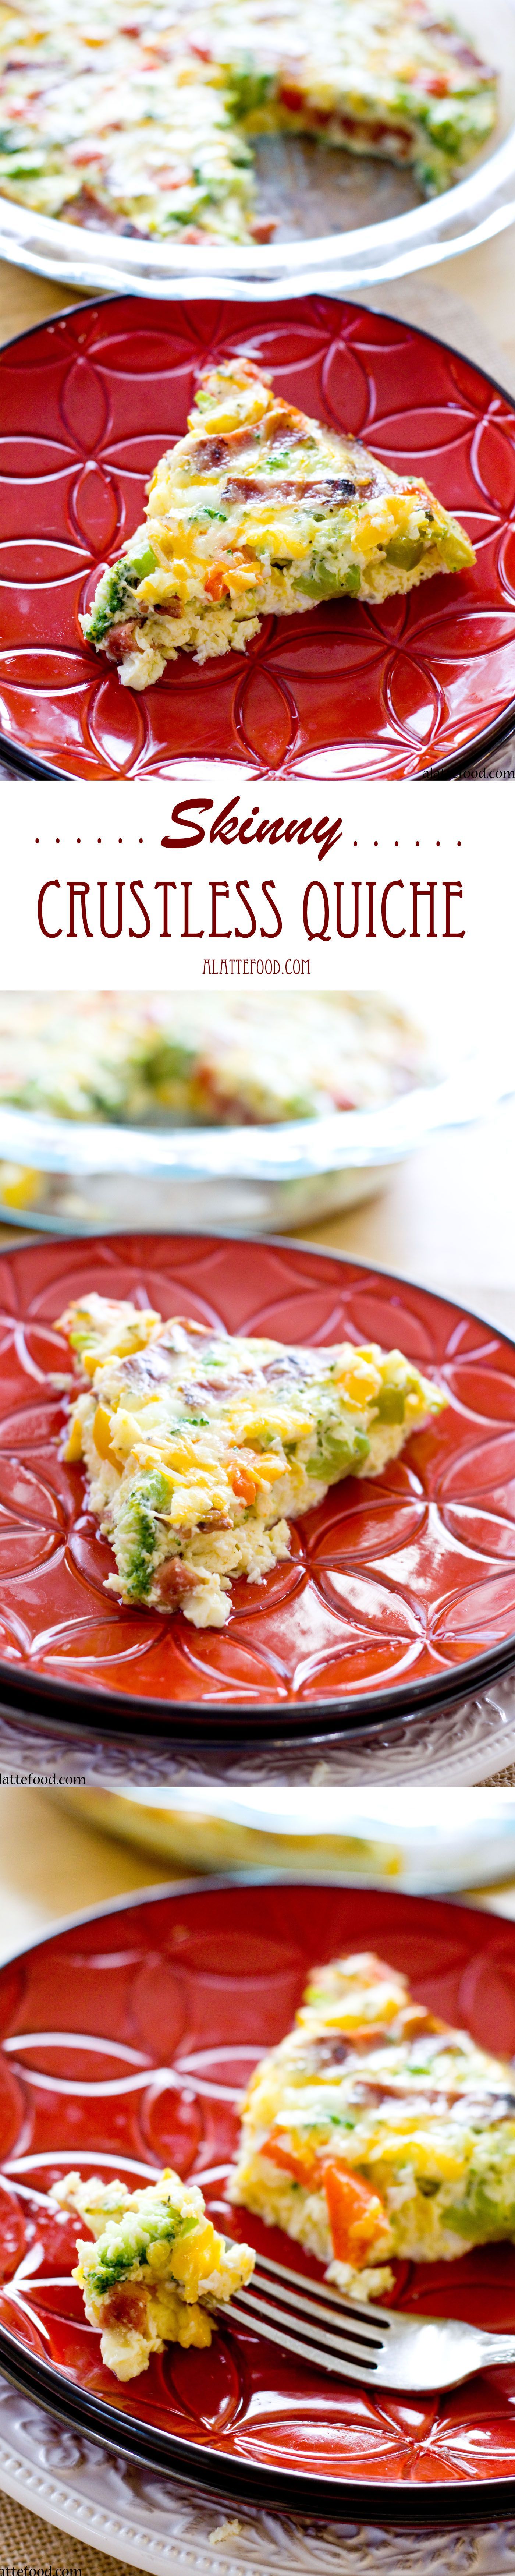 Skinny Crustless Quiche | This delicious quiche has all the taste without the calories! You won’t feel guilty serving up a slice